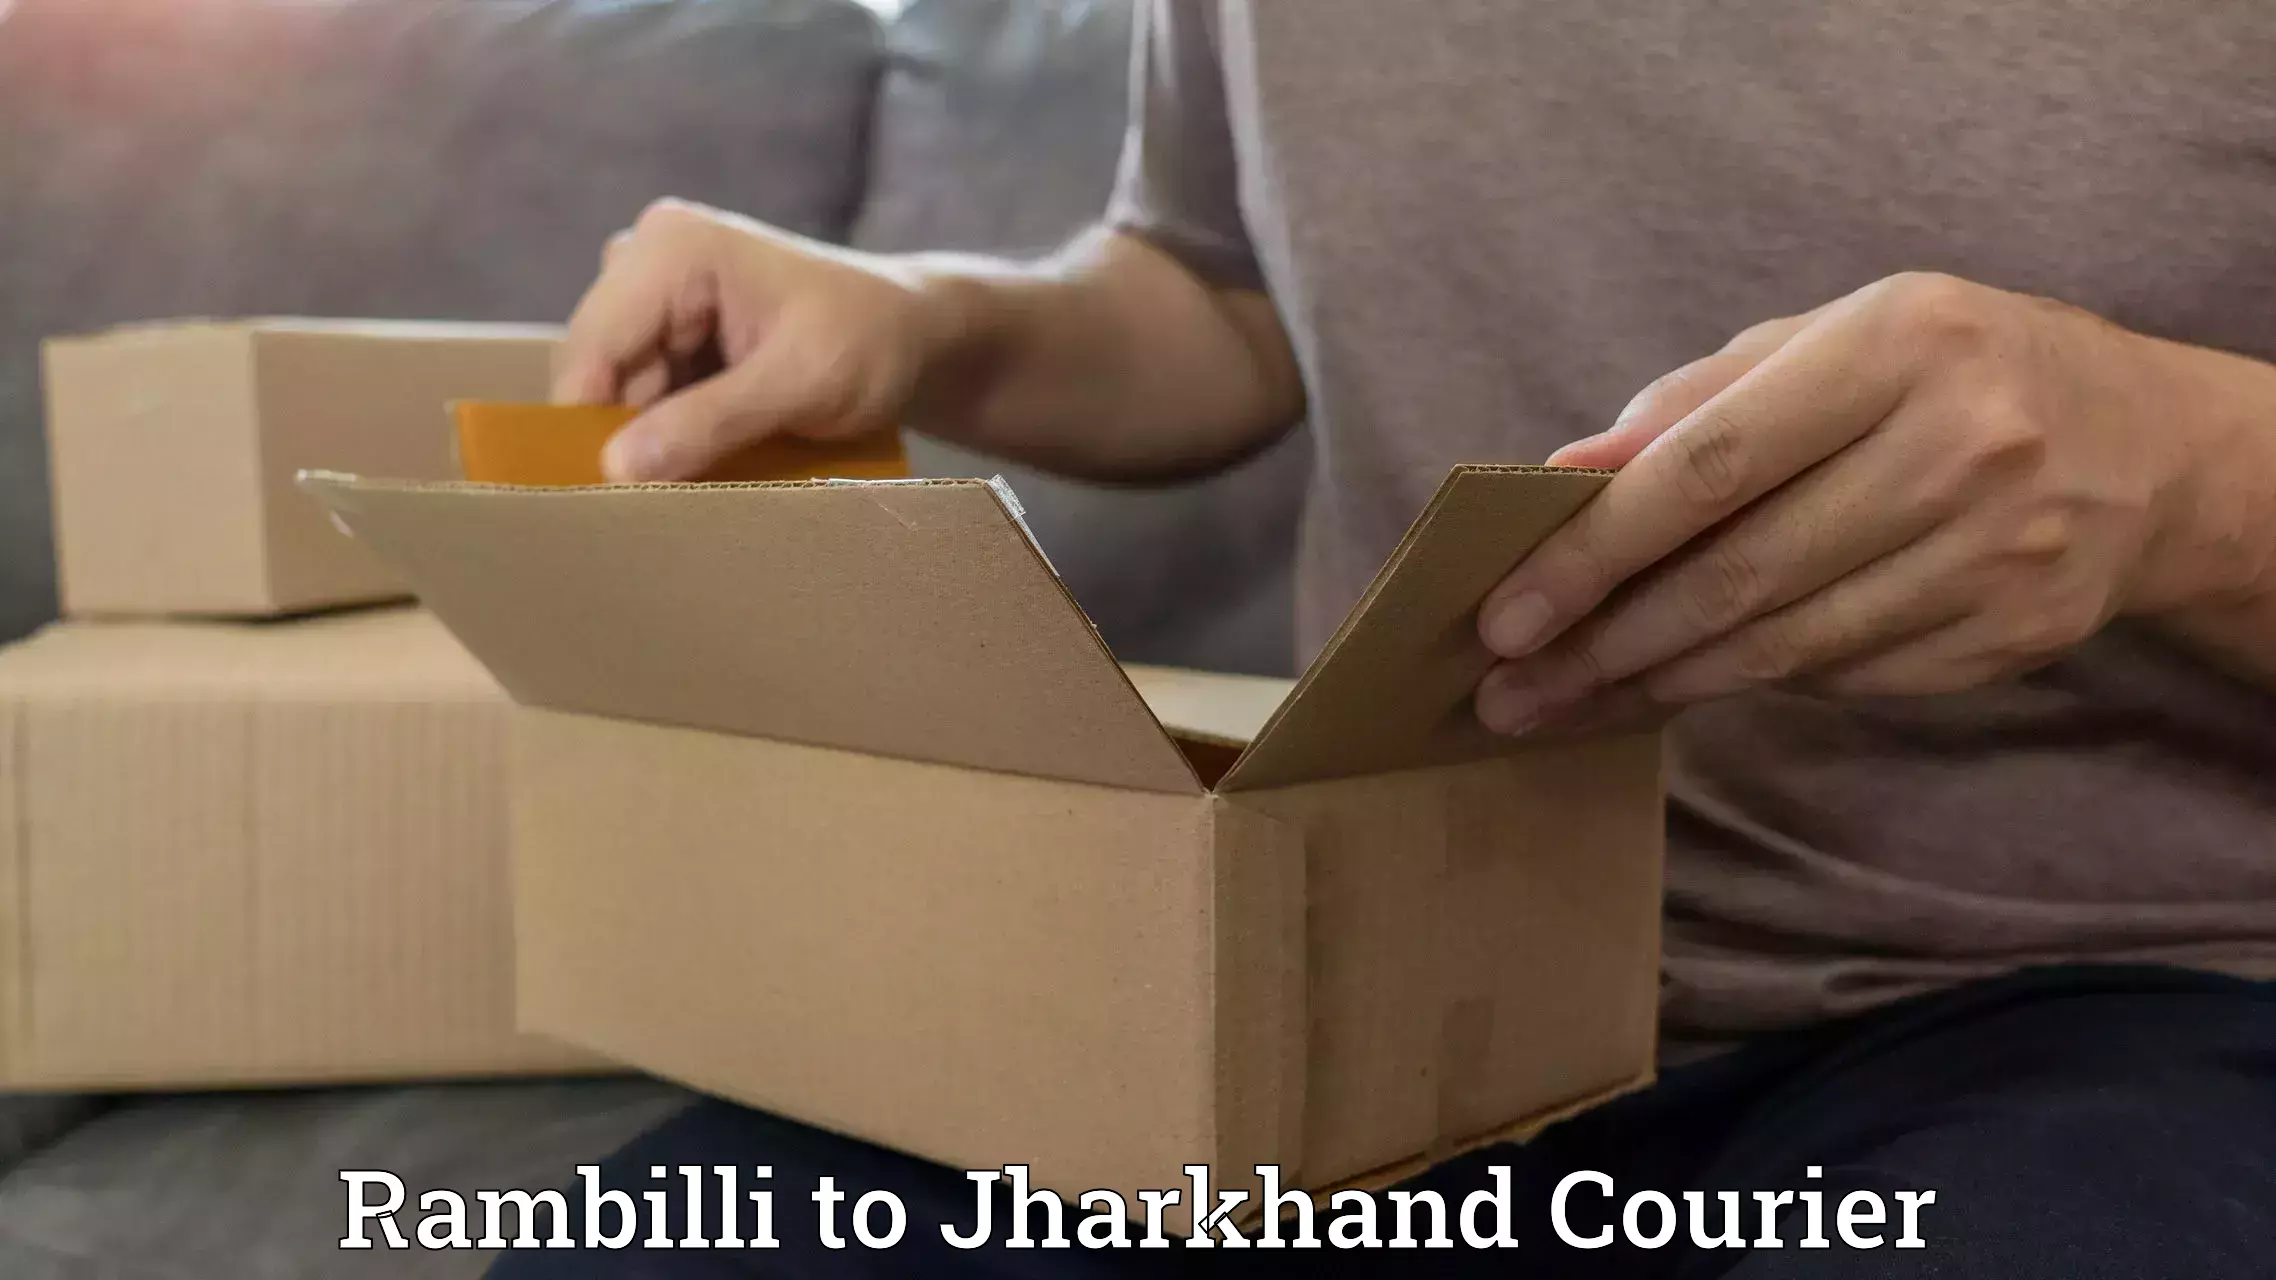 Professional courier handling Rambilli to Chatra